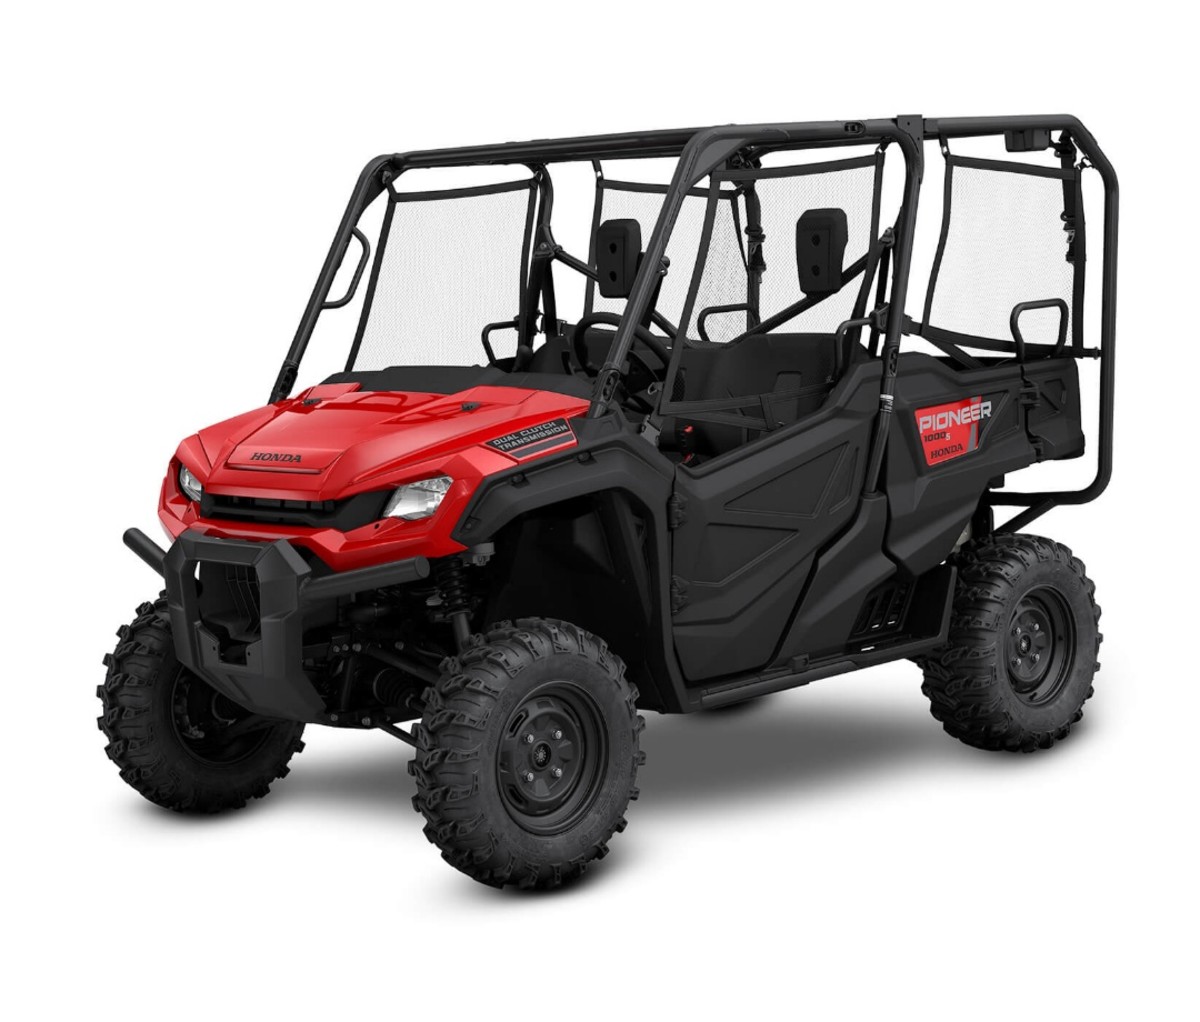 Honda Pioneer 1000-5 in red on a white background. side-by-side UTVs